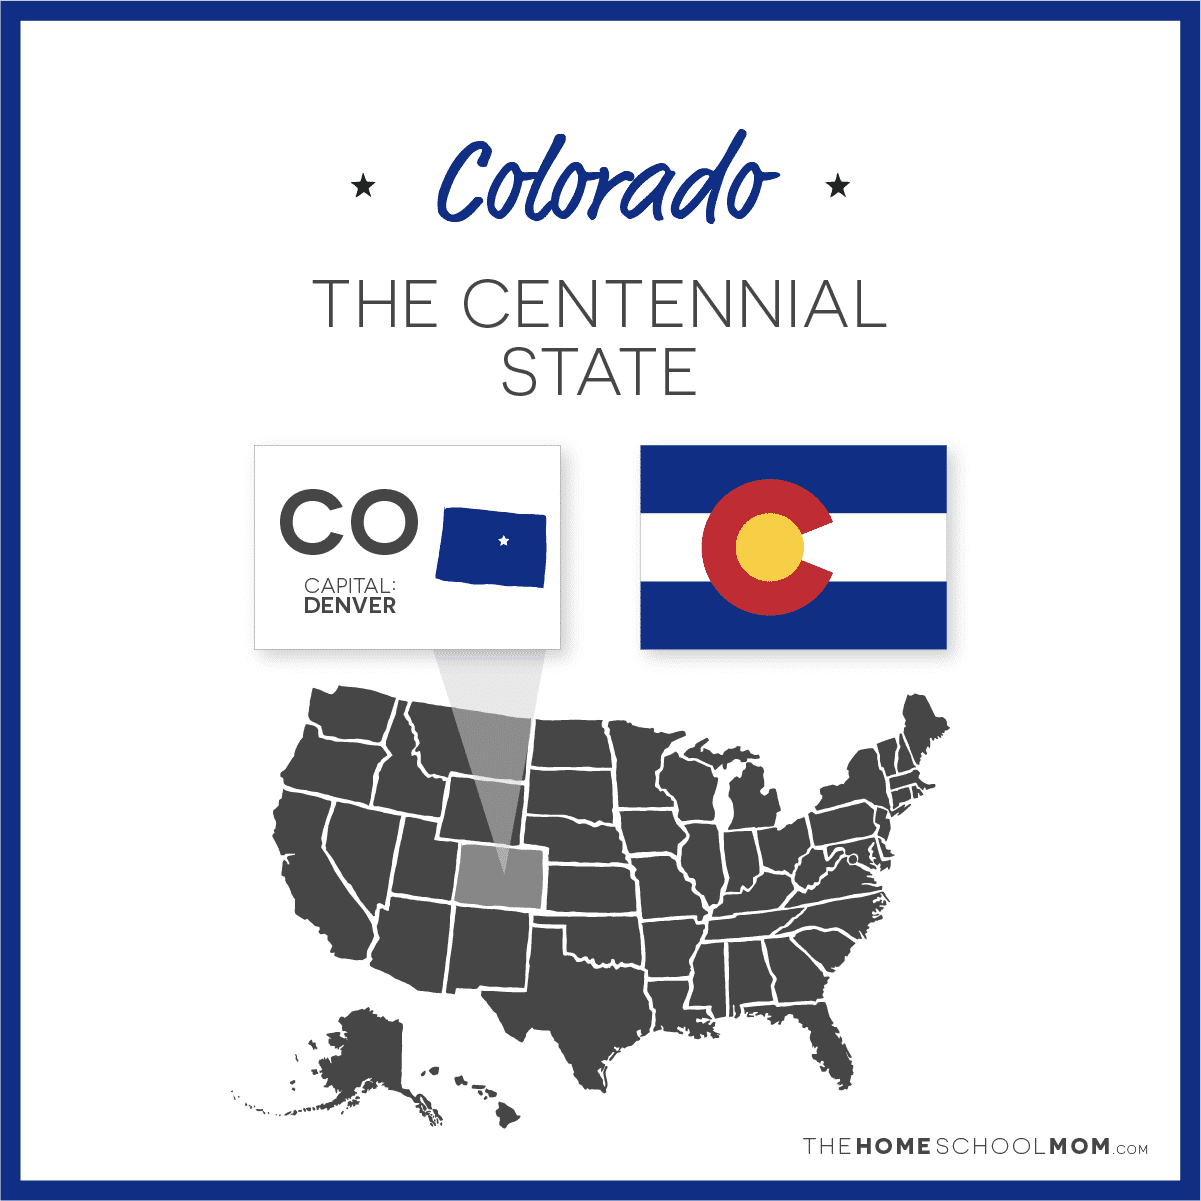 Map of US with Colorado highlighted and text Colorado - The Centennial State; capital – Denver